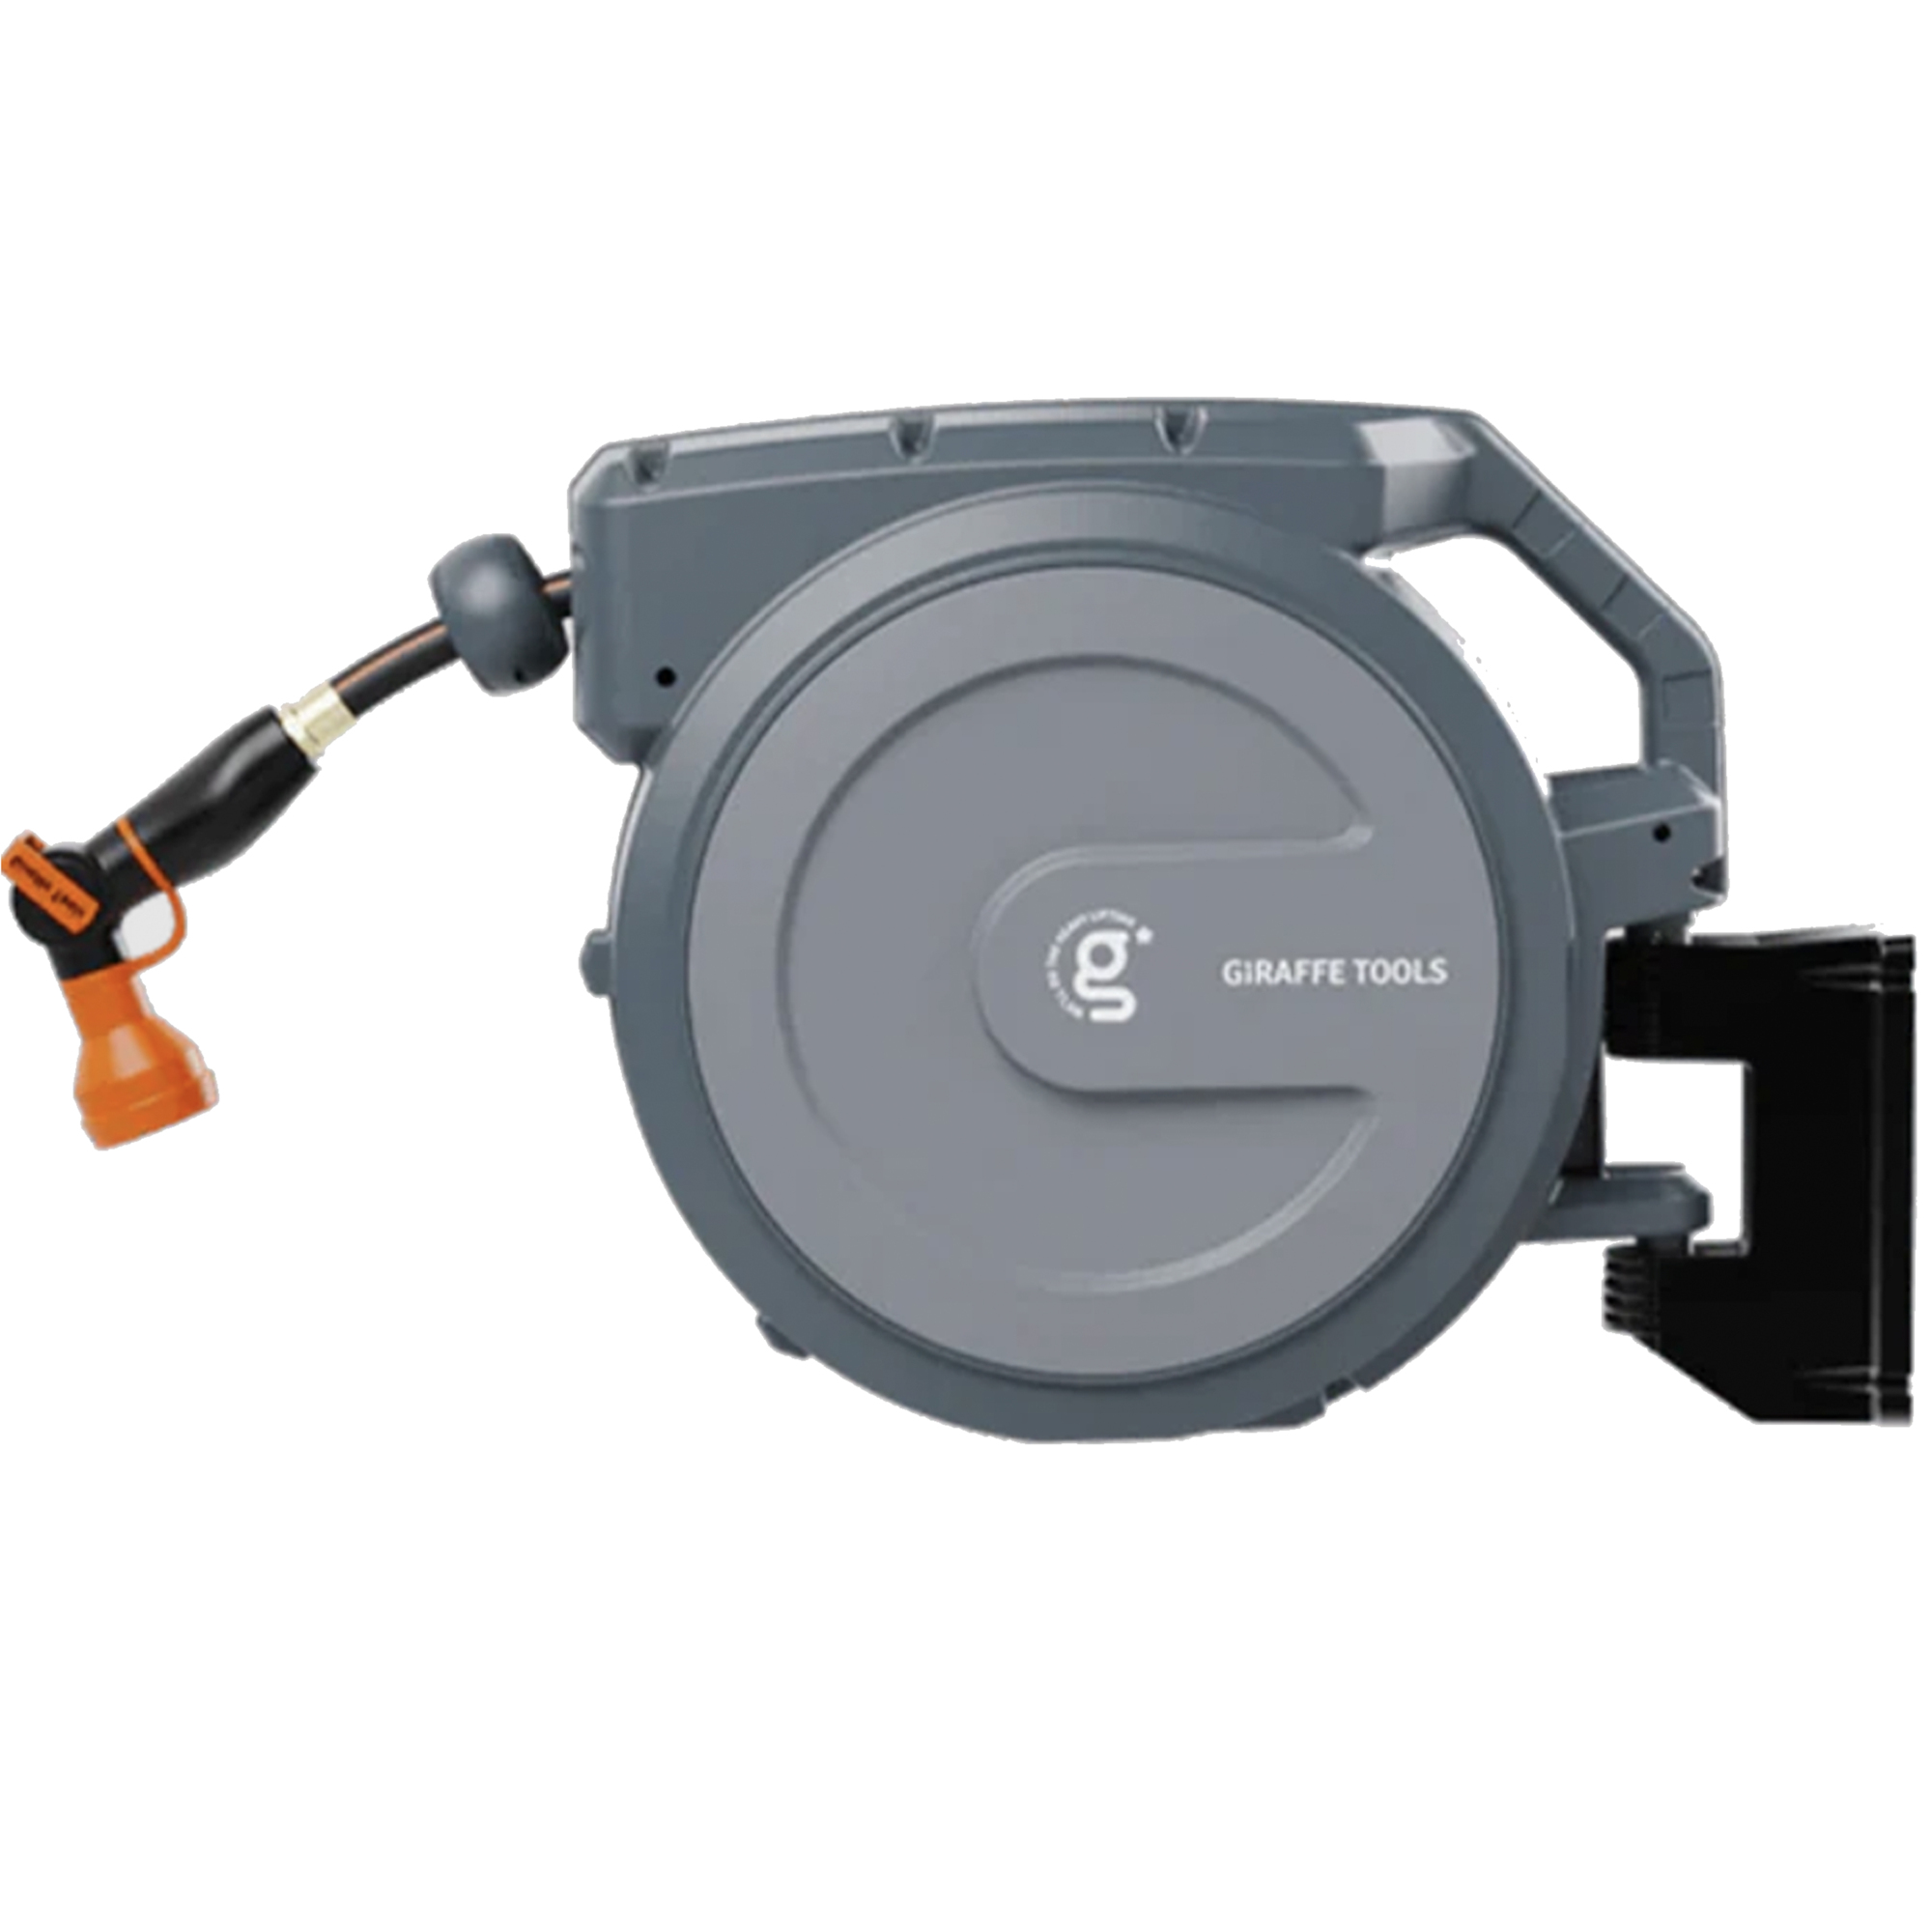 Giraffe Tools, Garden Hose Reel 5/8in. 90ft.Metal,Wall Mounted,GY, Hose  Length Capacity 90 ft, Color Gray, Model# AW4058US-MB